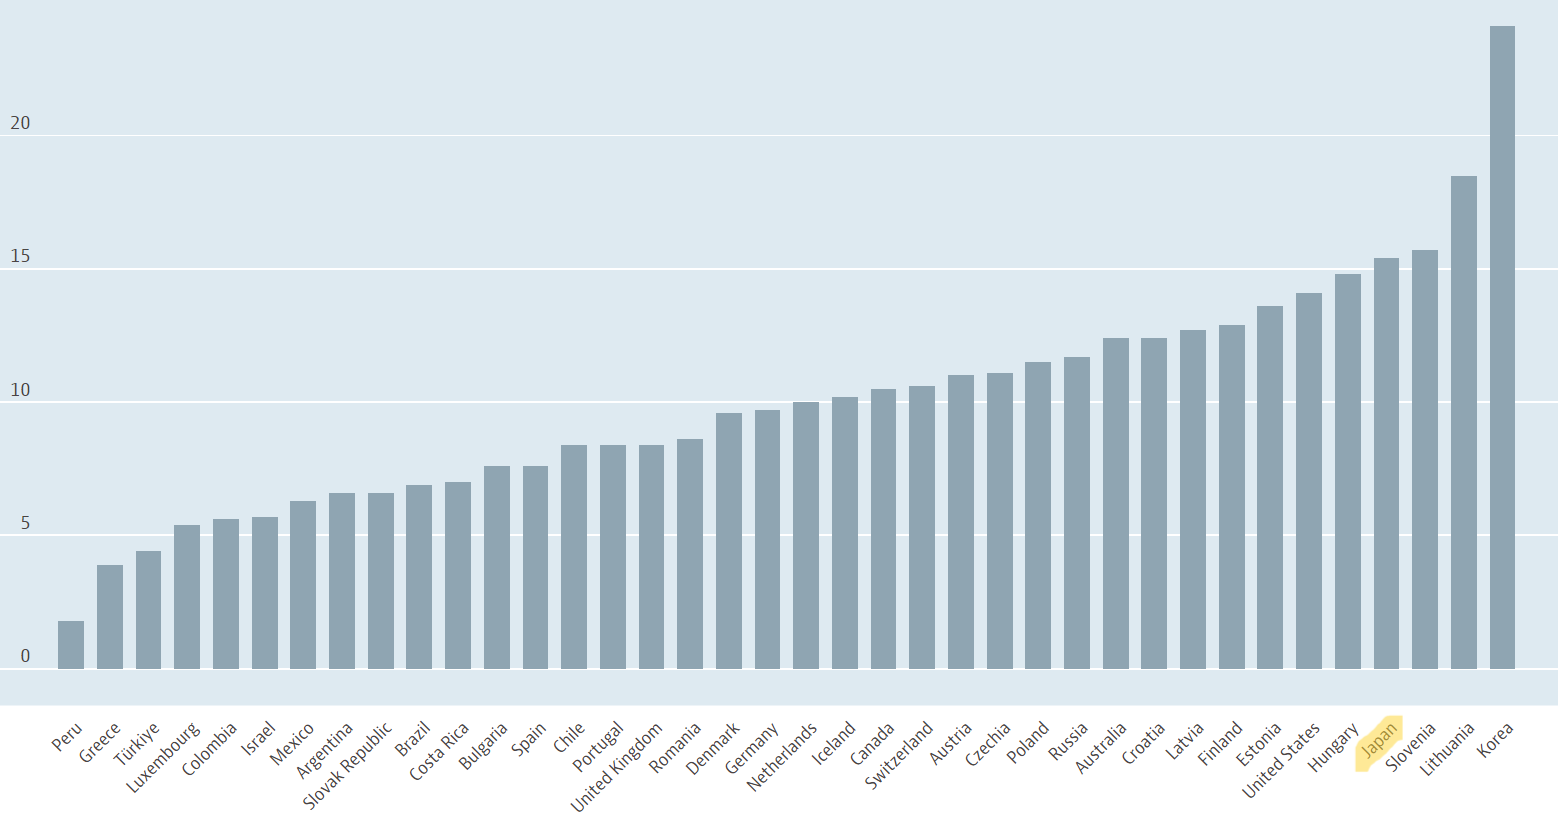 Japan's suicide rate ranks 4th among the 38 countries in the OECD (2020)